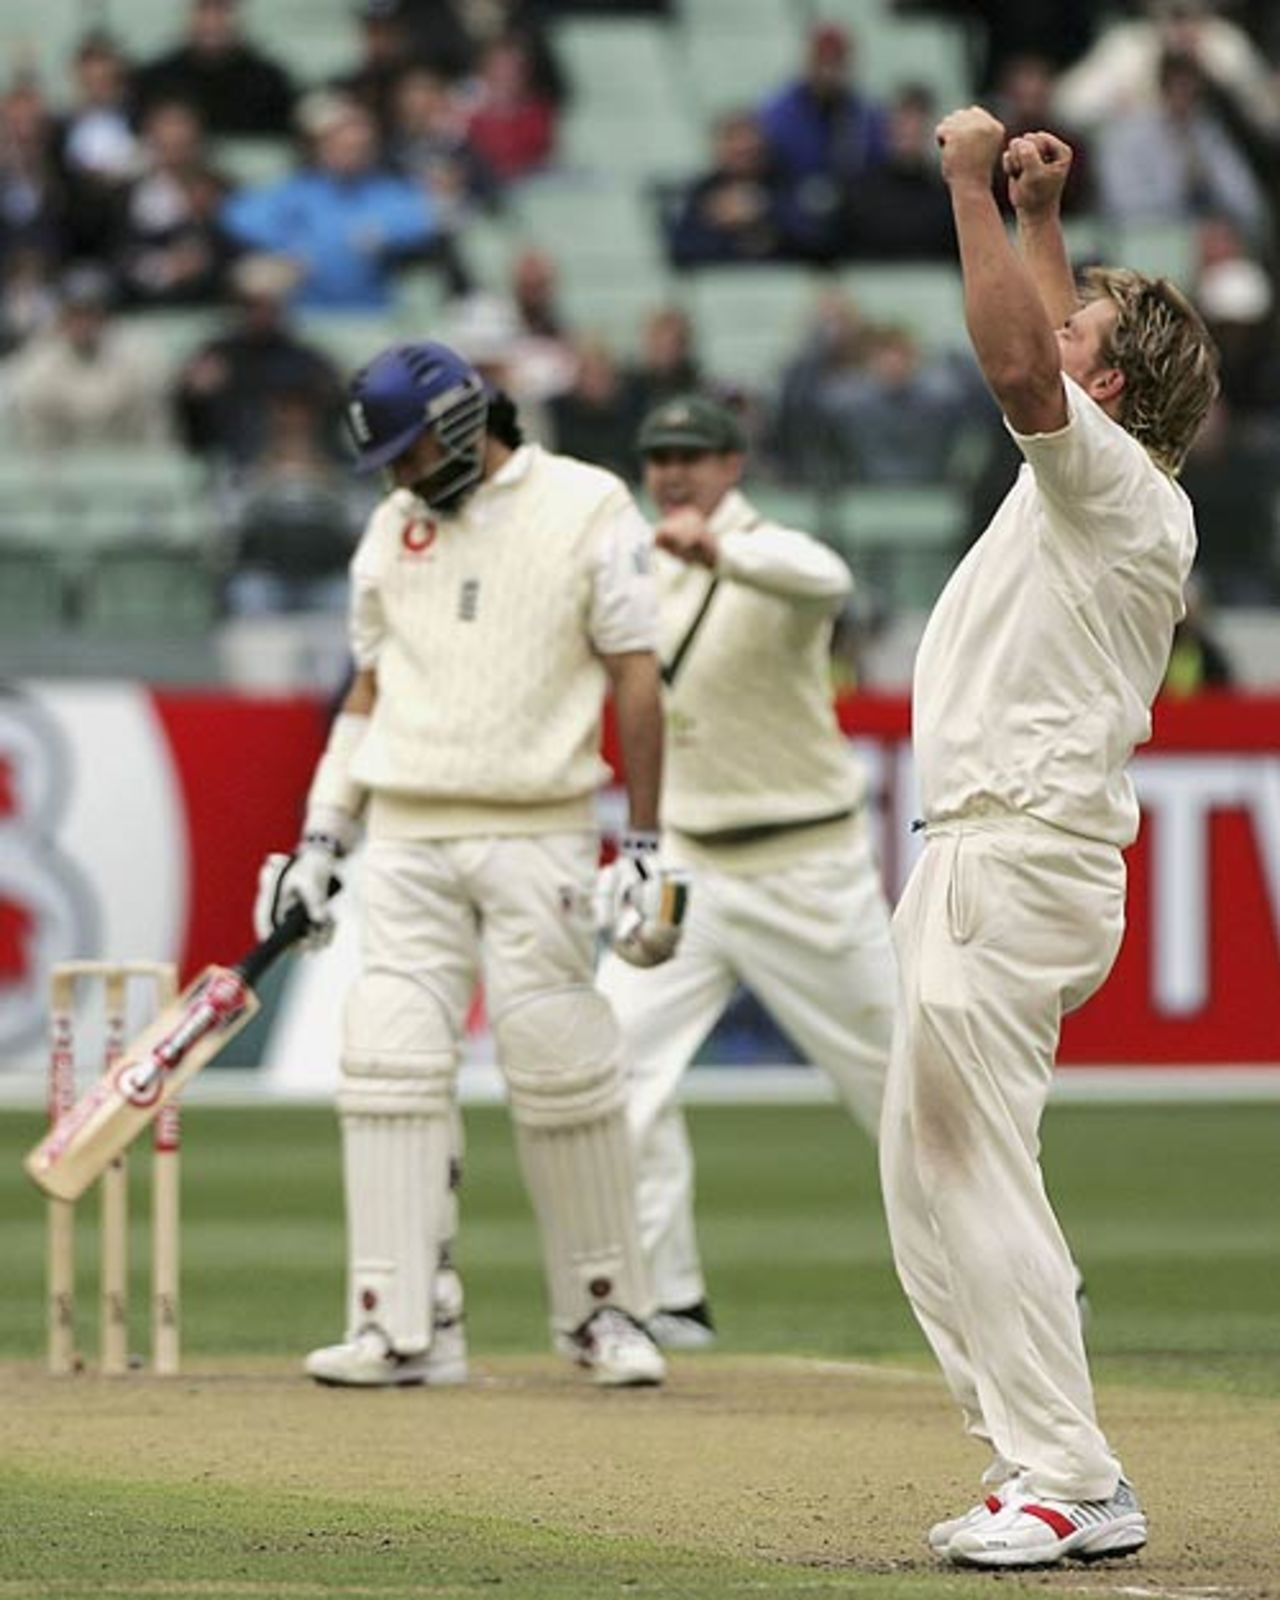 Shane Warne celebrates having Monty Panesar caught, to give Warne a five-wicket haul in his final MCG Test, Australia v England, 4th Test, Melbourne, December 26, 2006